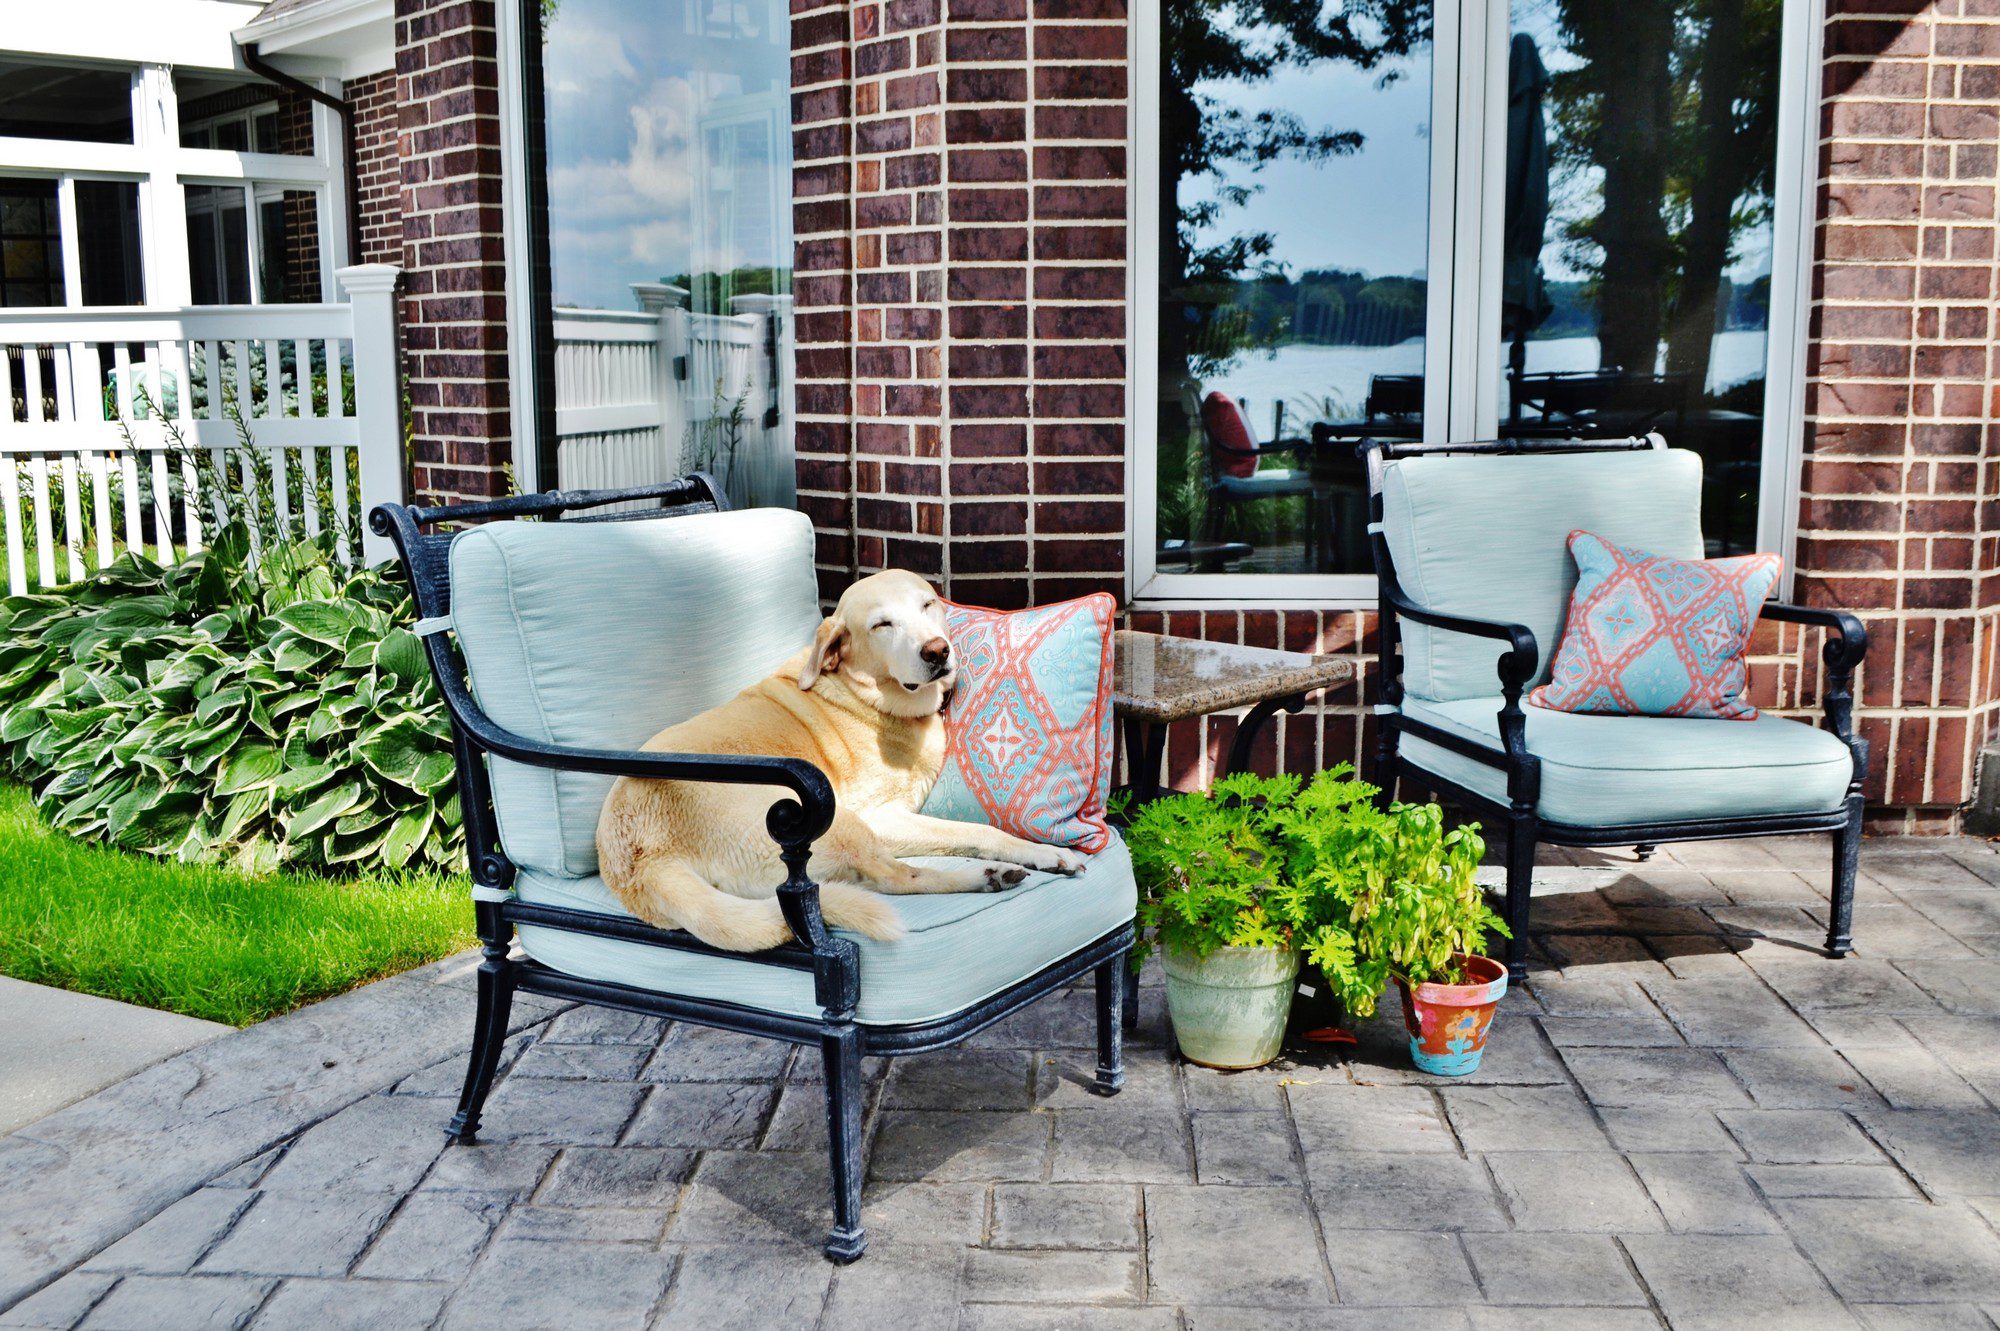 The image shows a relaxed dog lounging on a cushioned patio chair. The chair is black metal with light blue cushions, and it has a decorative red and blue pillow. There is another similar chair next to it. The setting appears to be a well-maintained outdoor space with a brick house in the background and large windows reflecting the lake and trees on the opposite shore. There's also a white railing suggesting a deck area and various potted plants around, contributing to a cosy, homey atmosphere. The paving on the ground is made of shaped stones. The dog seems to be enjoying a nice day outdoors.